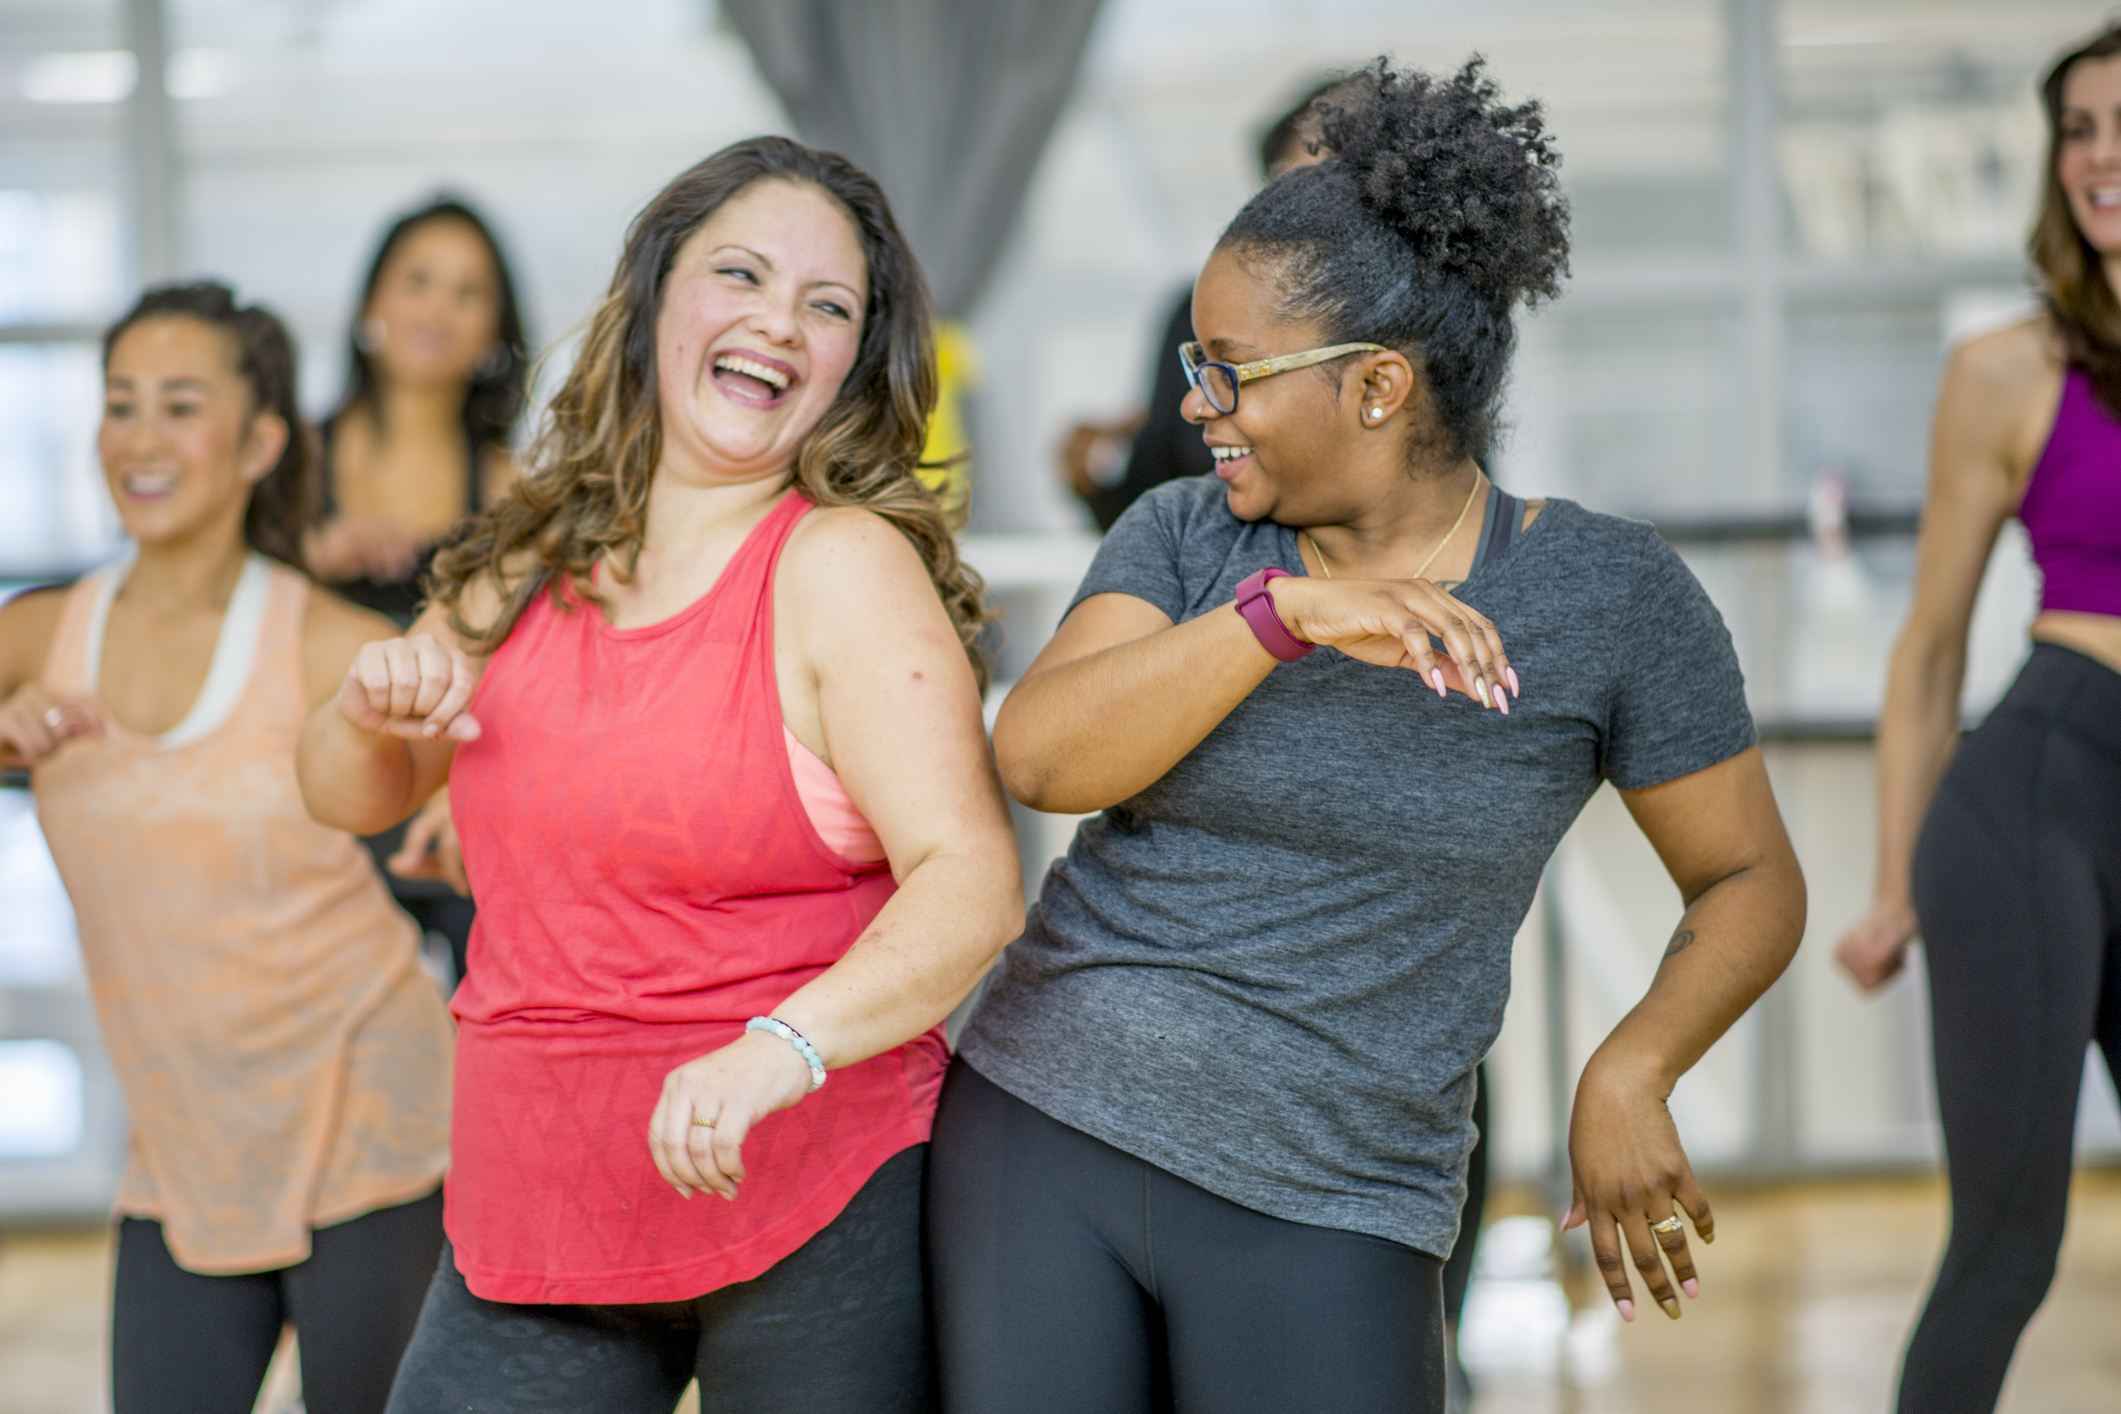 Women dancing together in an exercise class